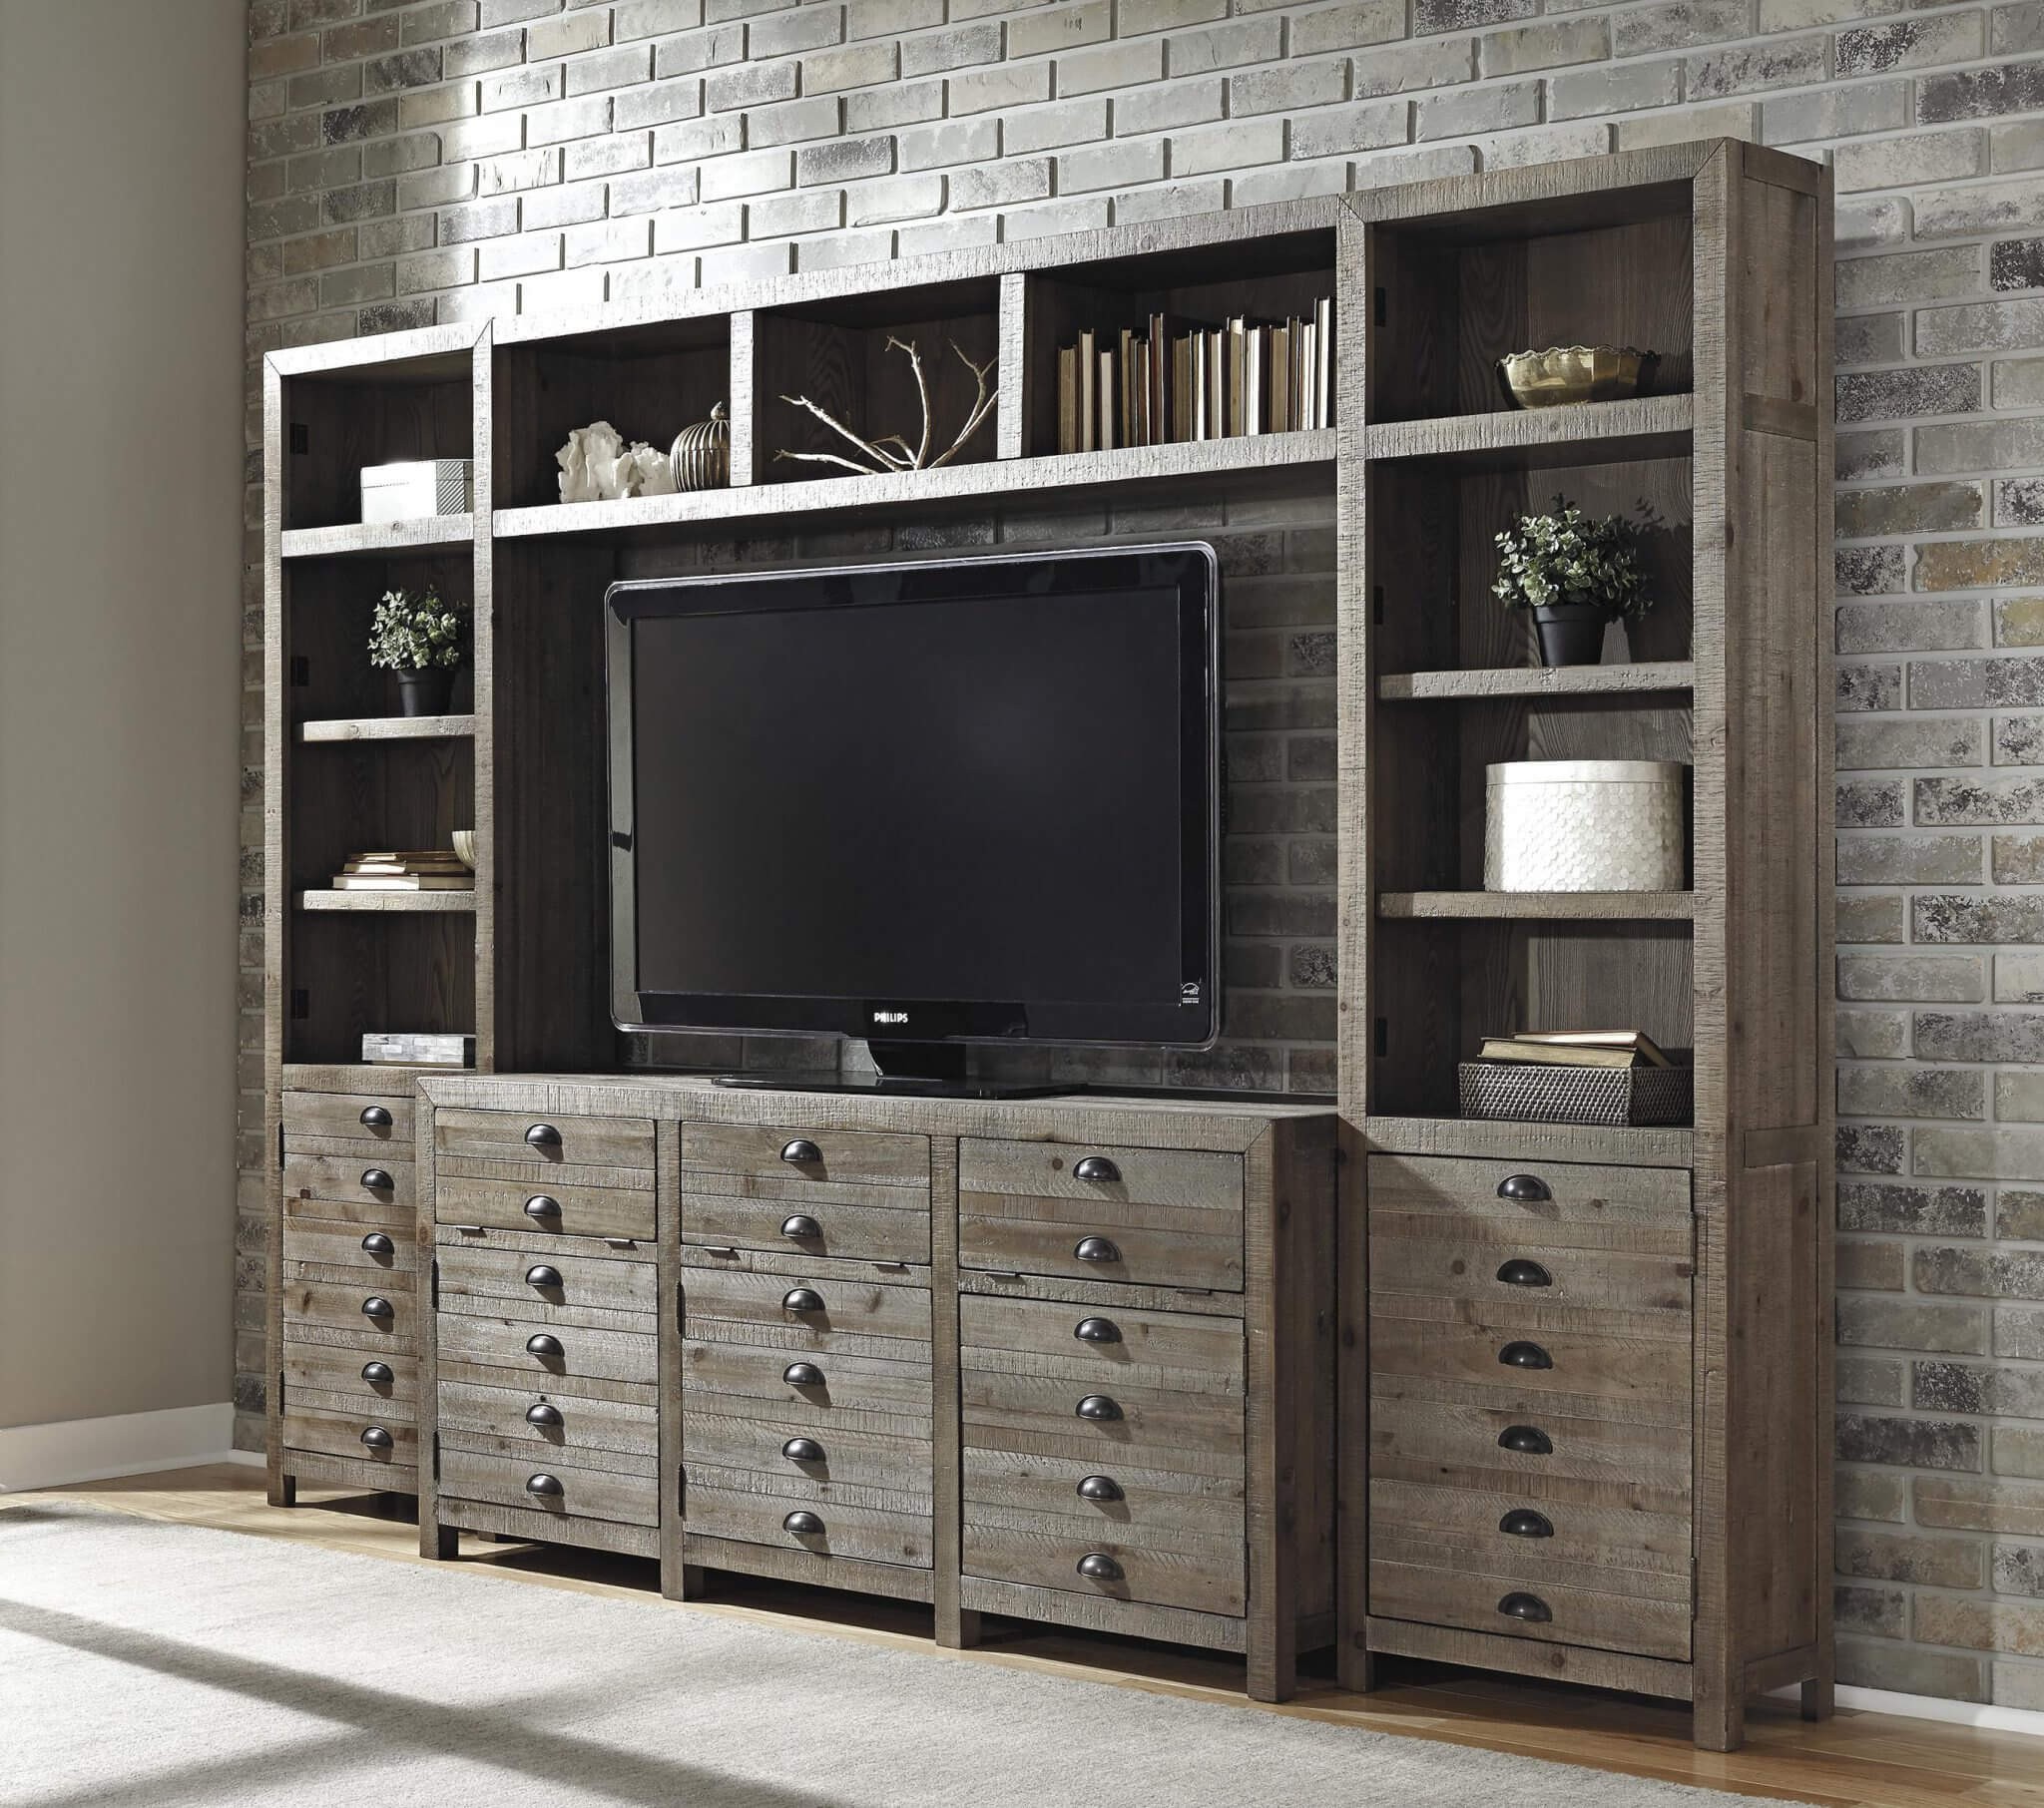 How to decorate with a pine tv stand interior decorating